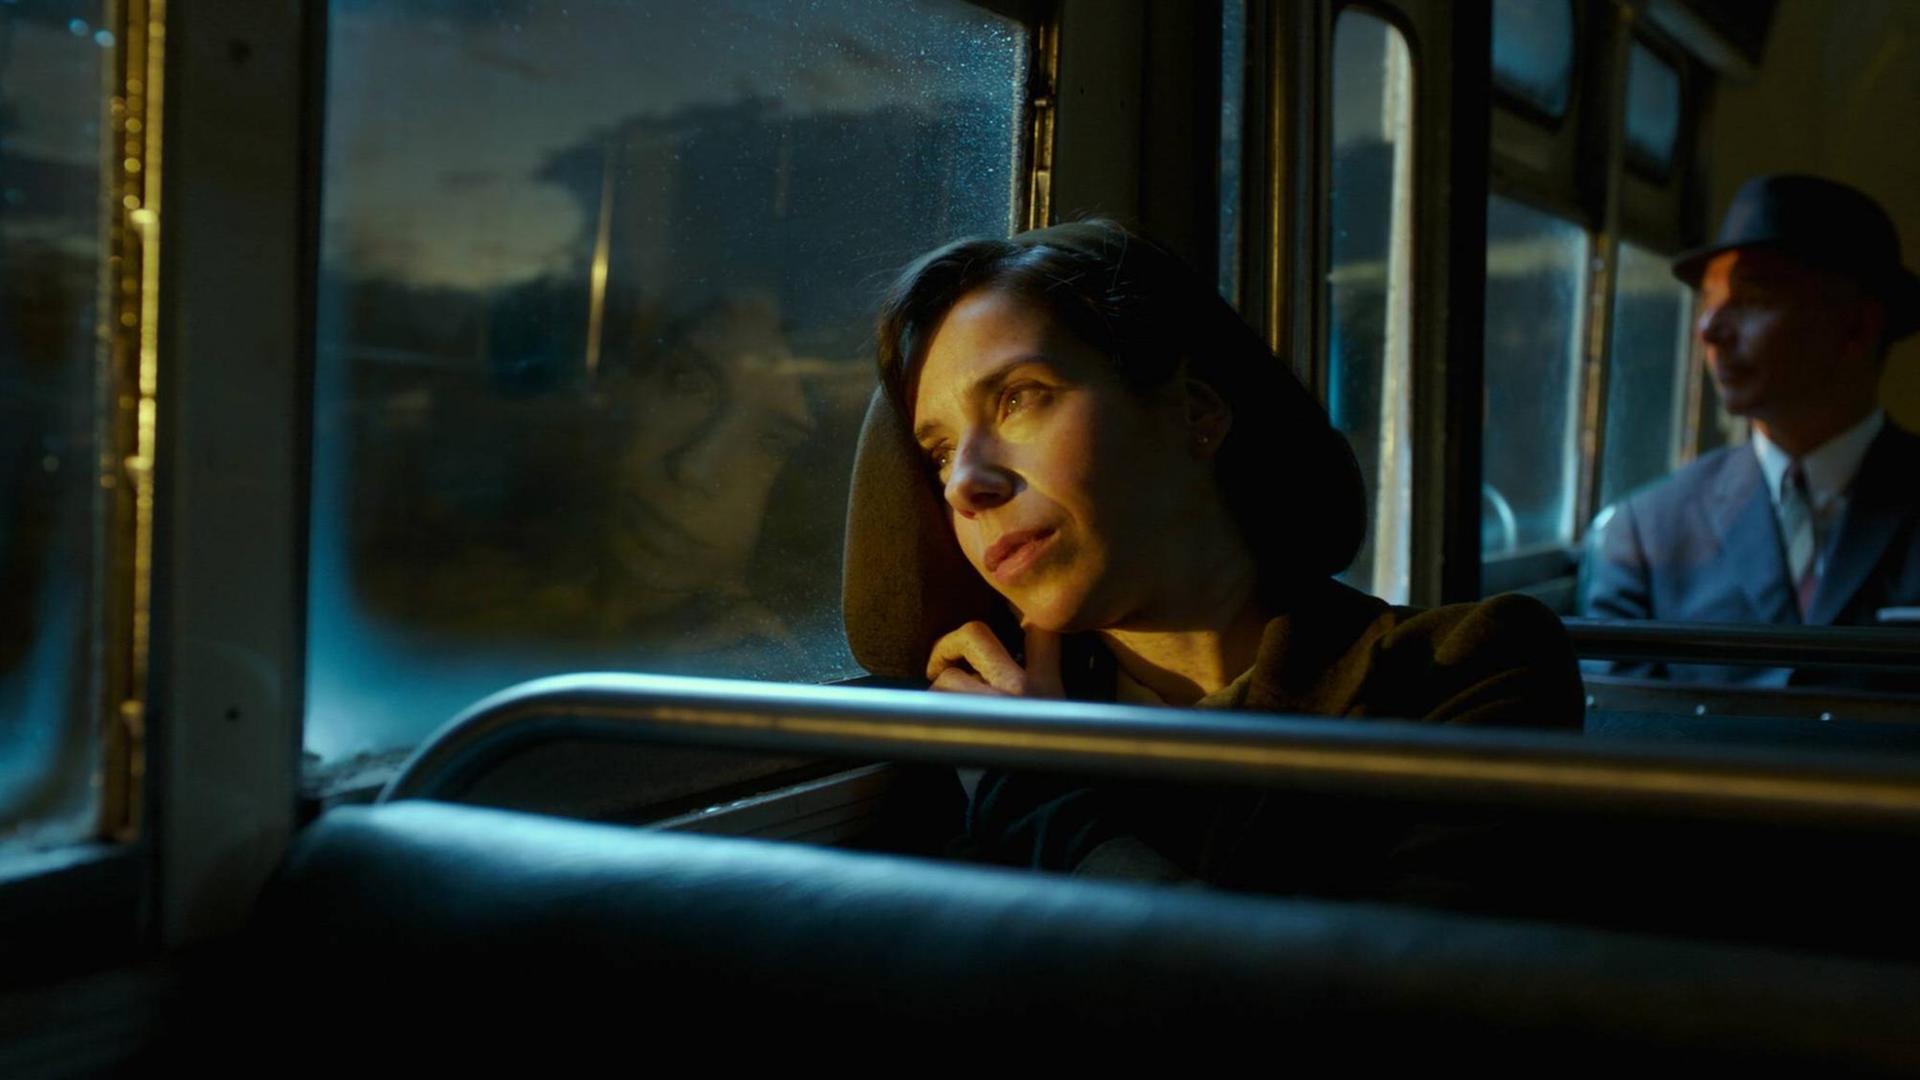 RELEASE DATE: December 8, 2017 TITLE: The Shape of Water STUDIO: DIRECTOR: Guillermo del Toro PLOT: An other-worldly fairy tale, set against the backdrop of Cold War era America circa 1963. In the hidden high-security government laboratory where she works, lonely Elisa (Sally Hawkins) is trapped in a life of silence and isolation. Elisa s life is changed forever when she and co-worker Zelda (Octavia Spencer) discover a secret classified experiment. STARRING: SALLY HAWKINS as Elisa. Toronto Canada PUBLICATIONxINxGERxSUIxAUTxONLY - ZUMAl90_ 20171121_shd_l90_016 Copyright: xFoxxSearchlightxPicturesx